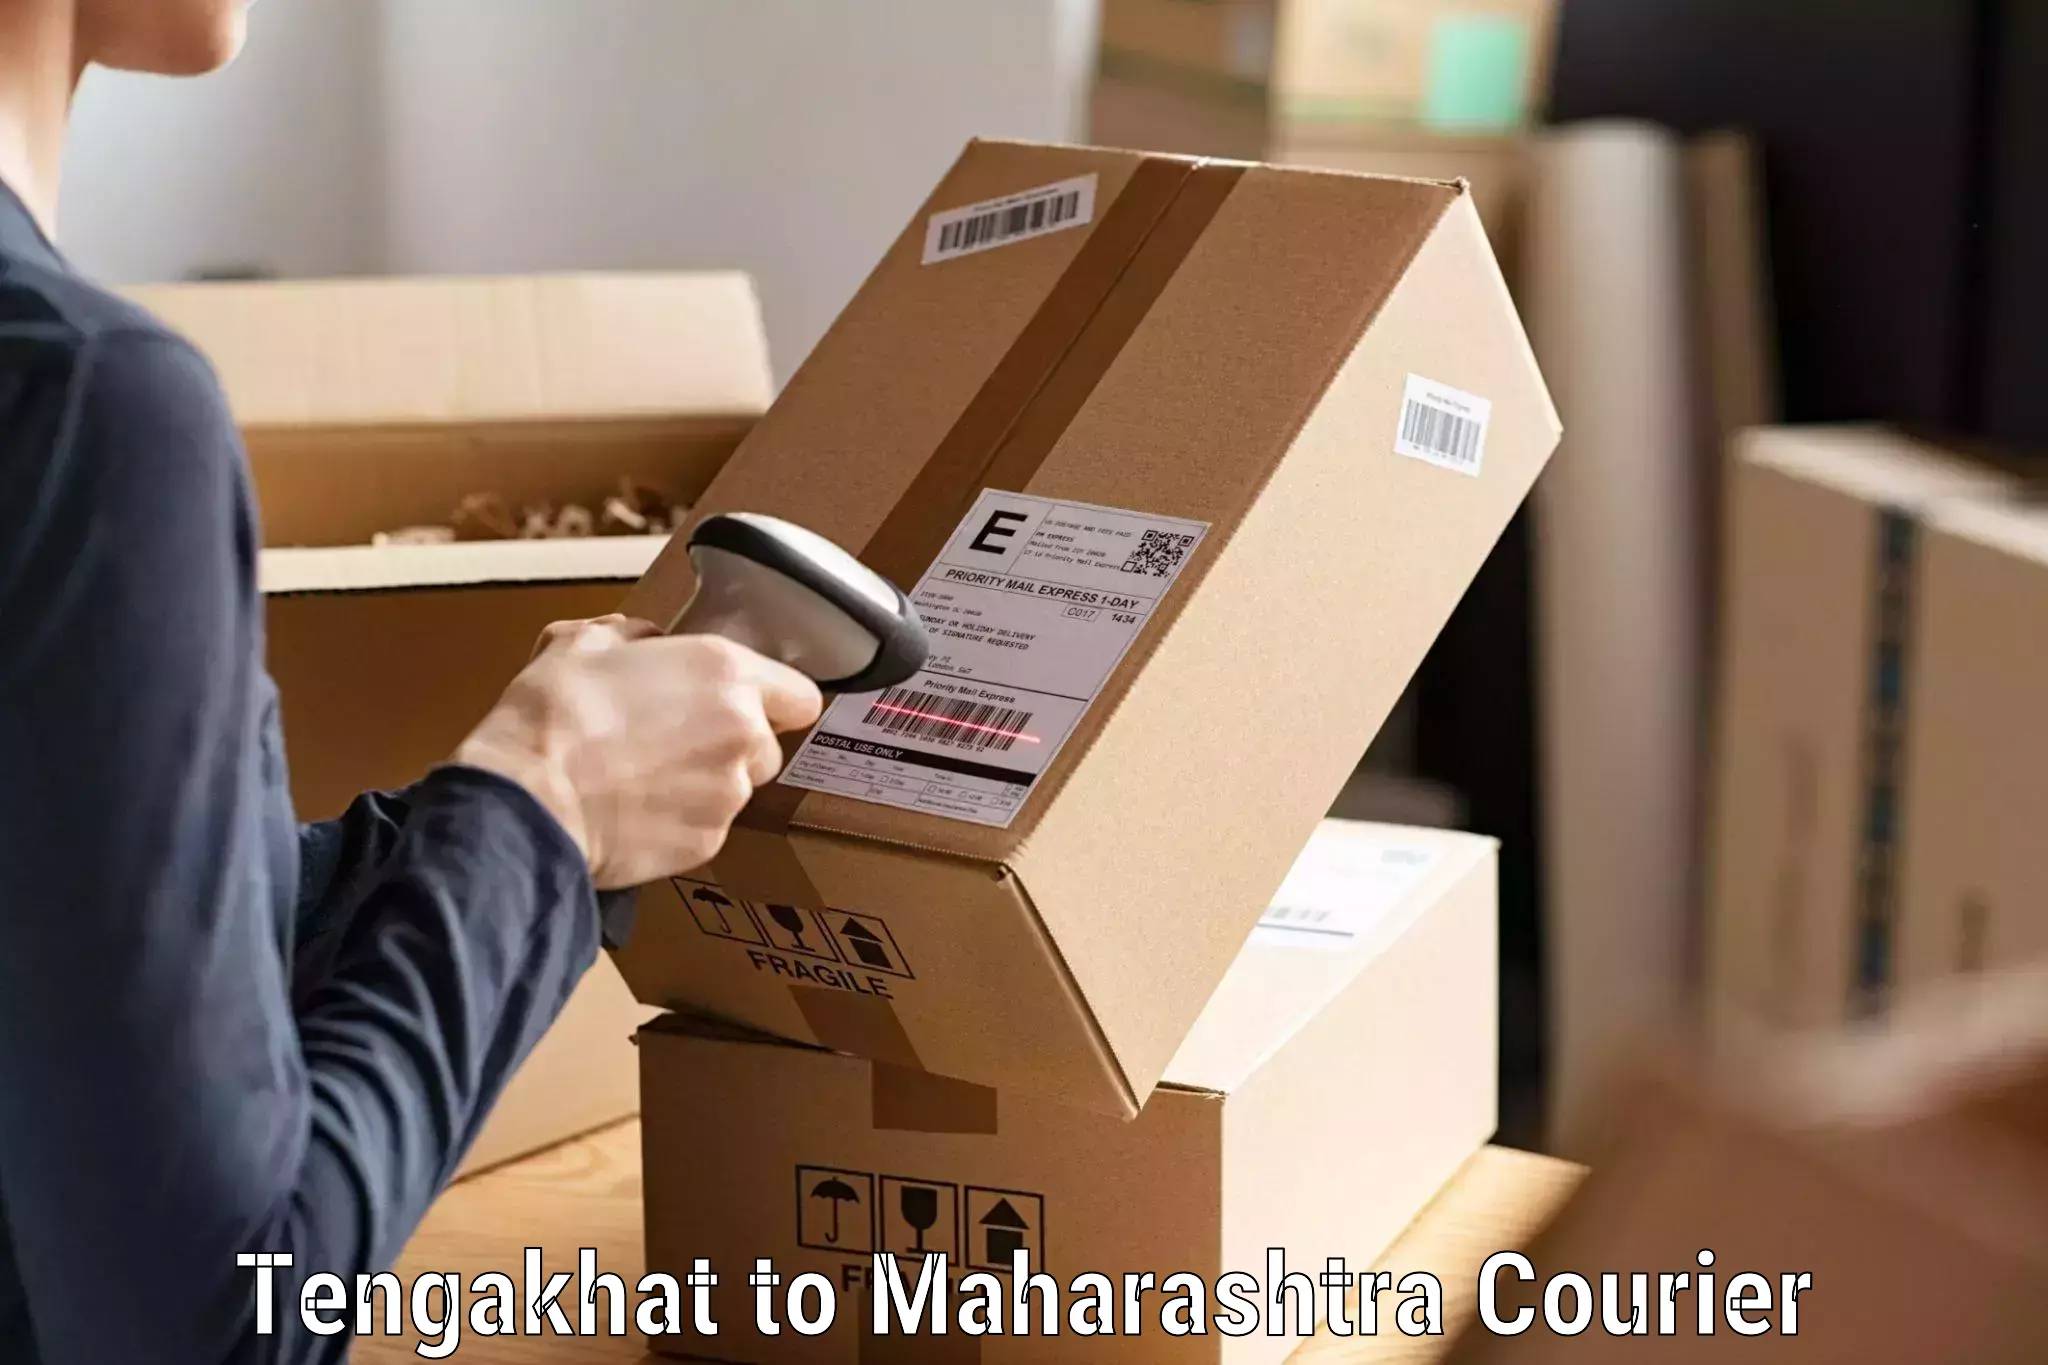 Multi-city courier Tengakhat to Parner